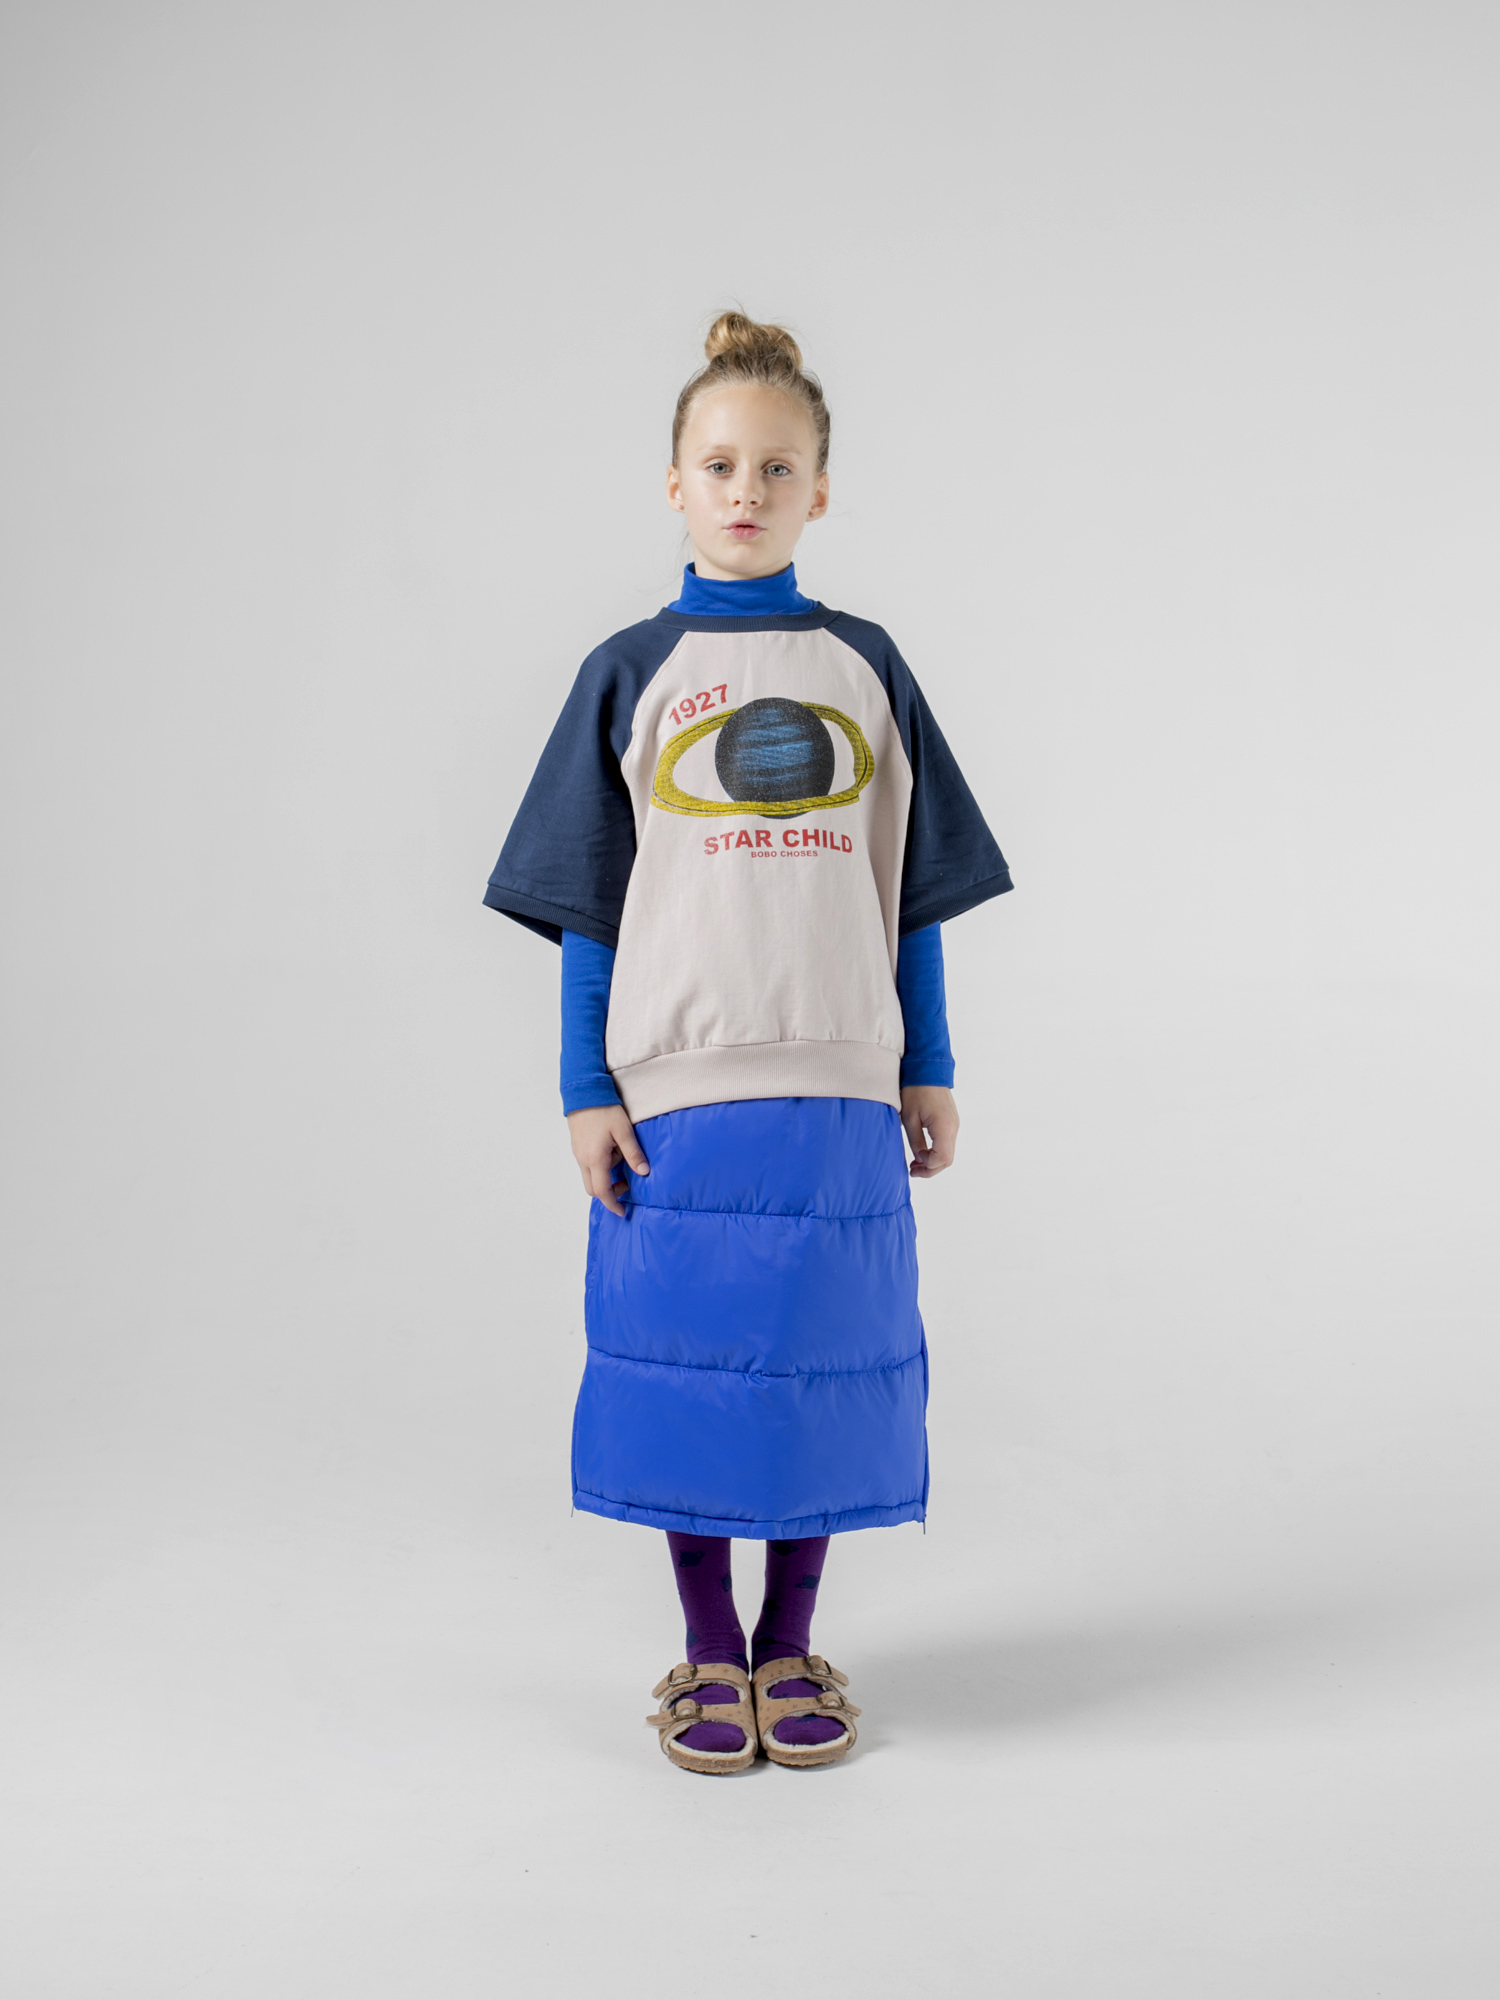 WE COSMOS AW19/20 BY BOBO CHOSES